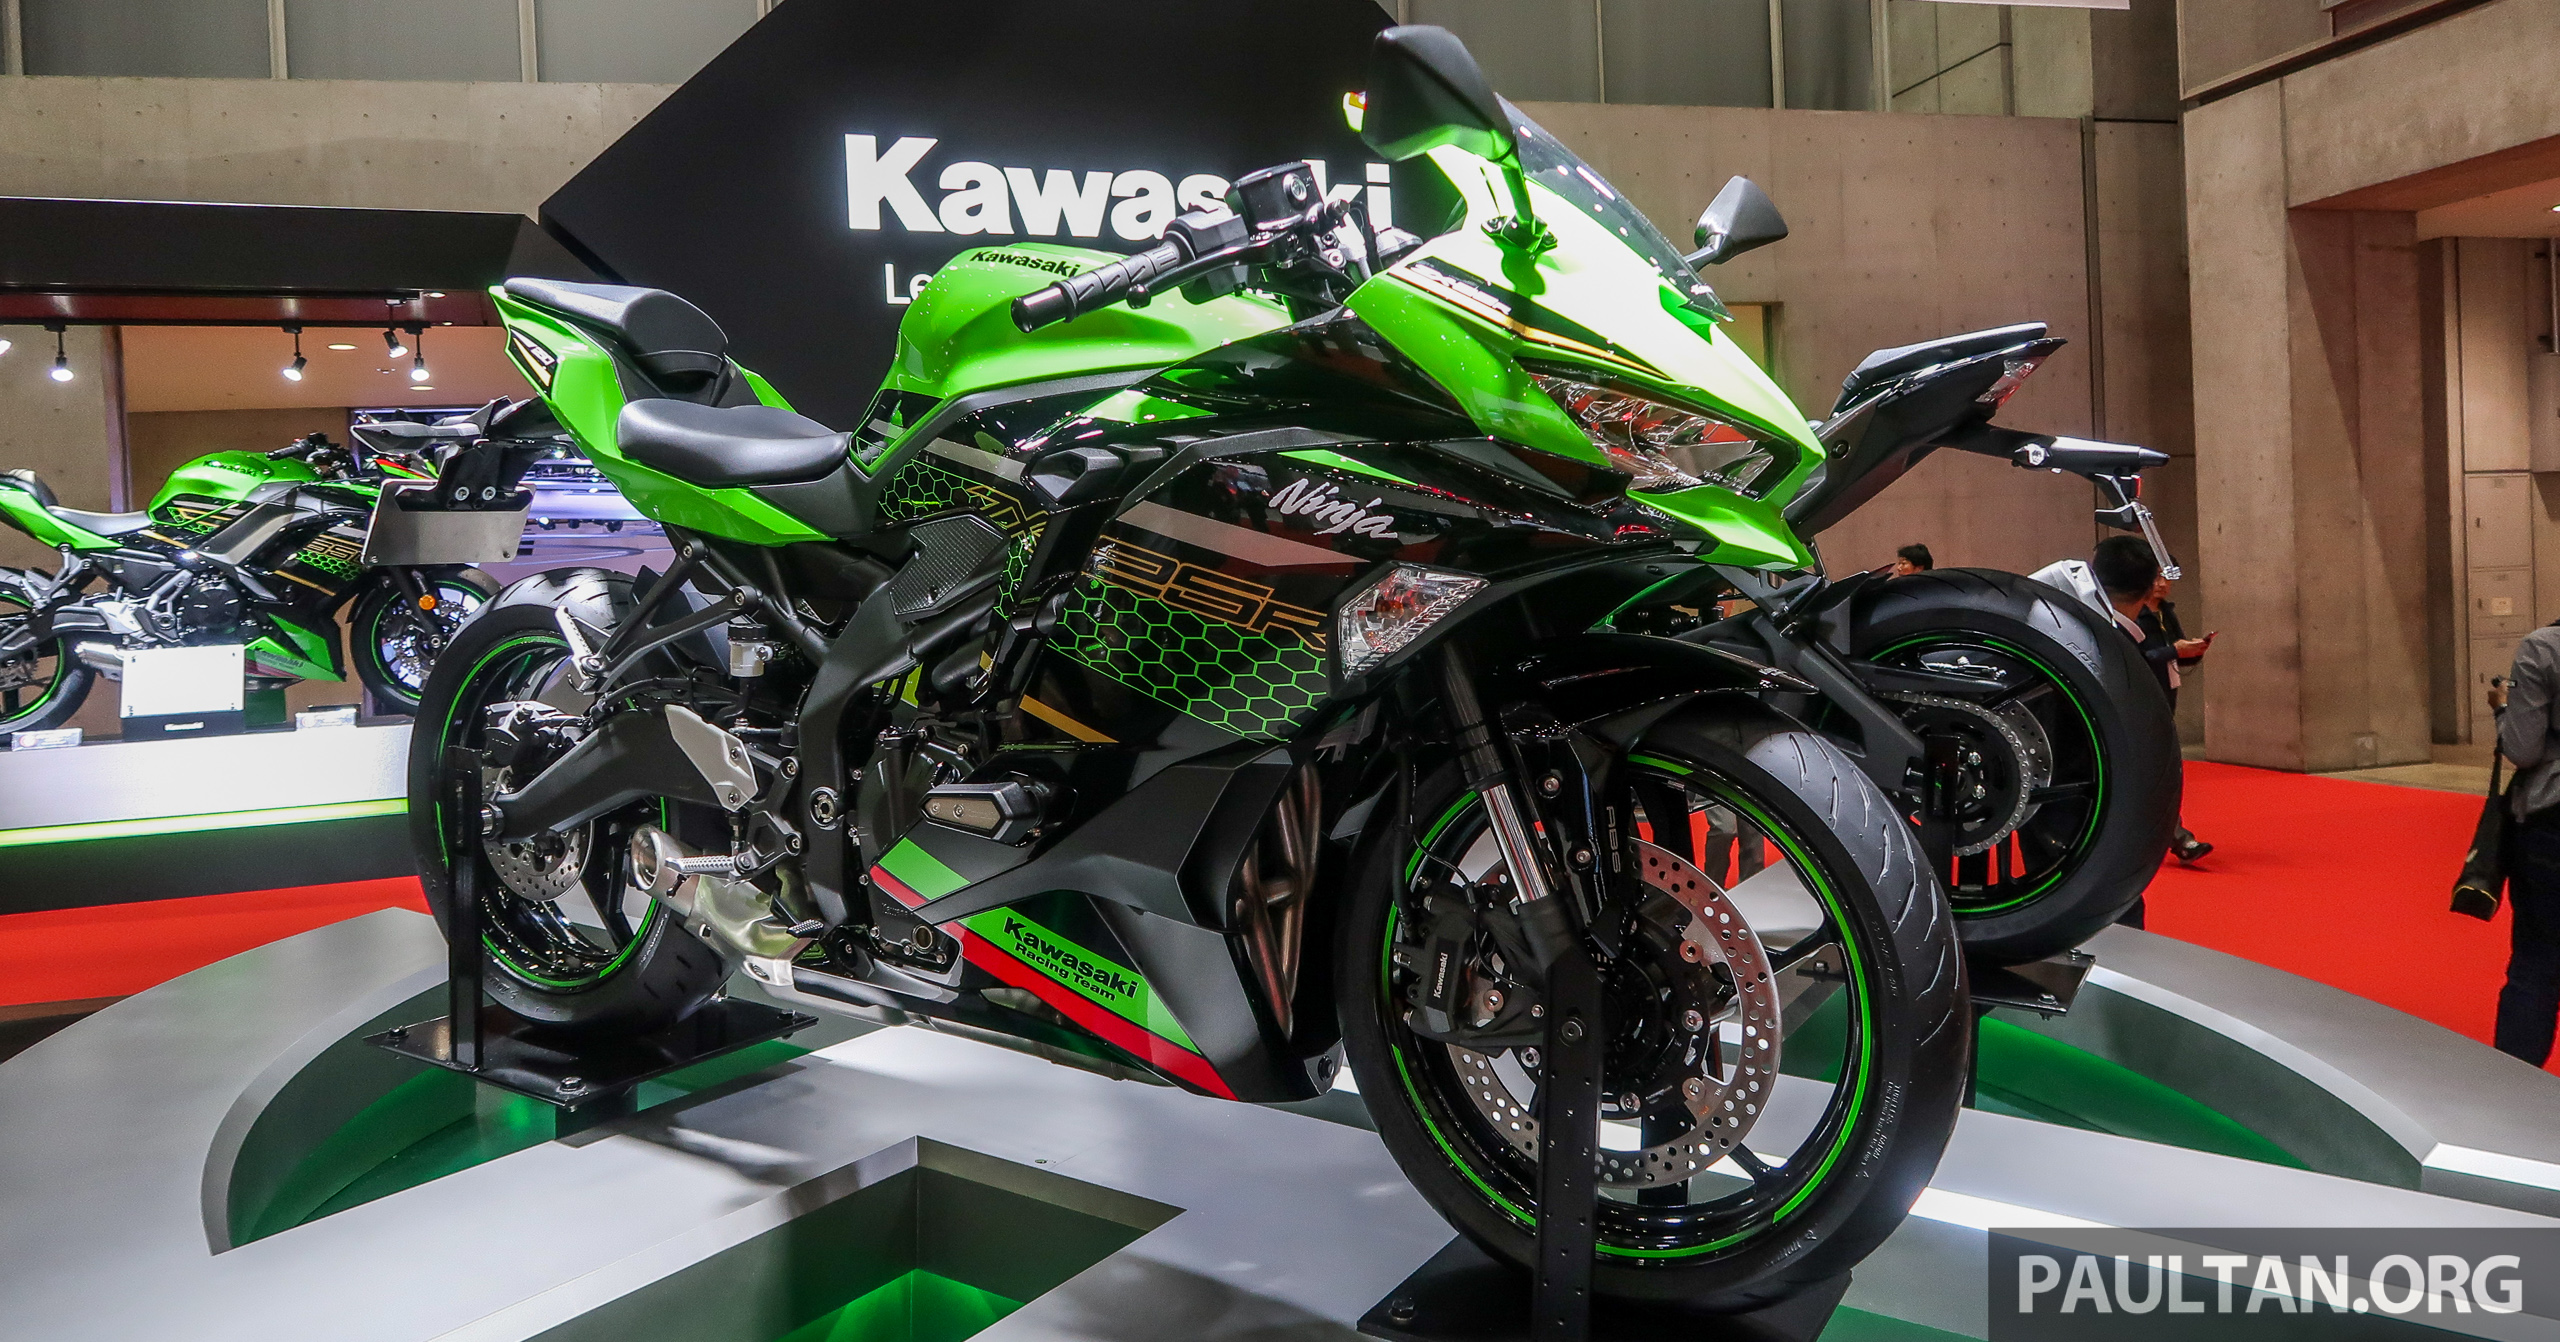 2020 Kawasaki Zx 25r Launched In Indonesia Two Versions